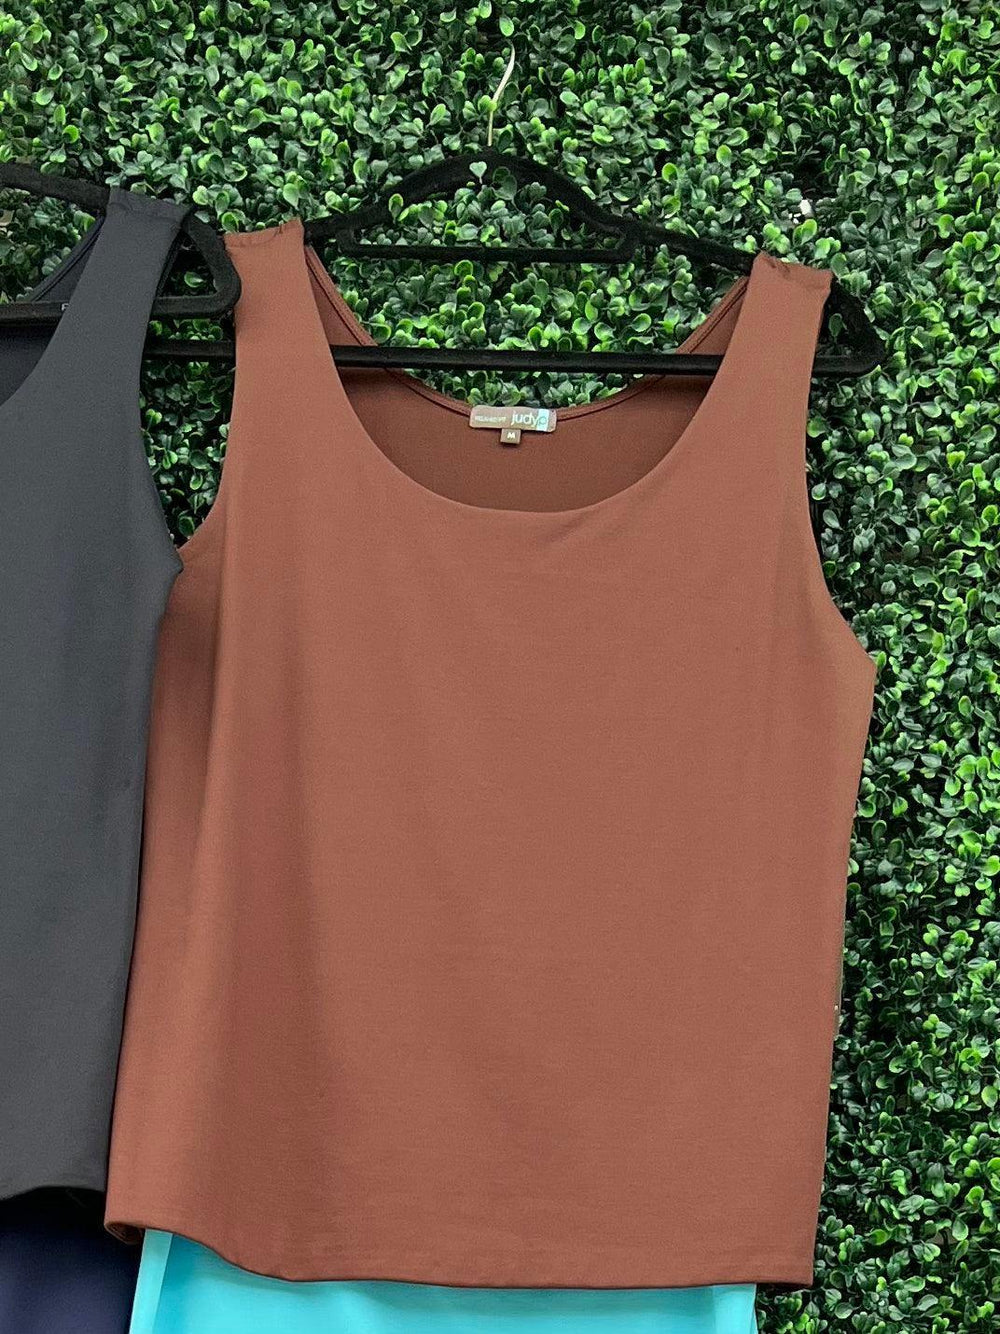 deep brown loose fit layering tank top from dress boutique